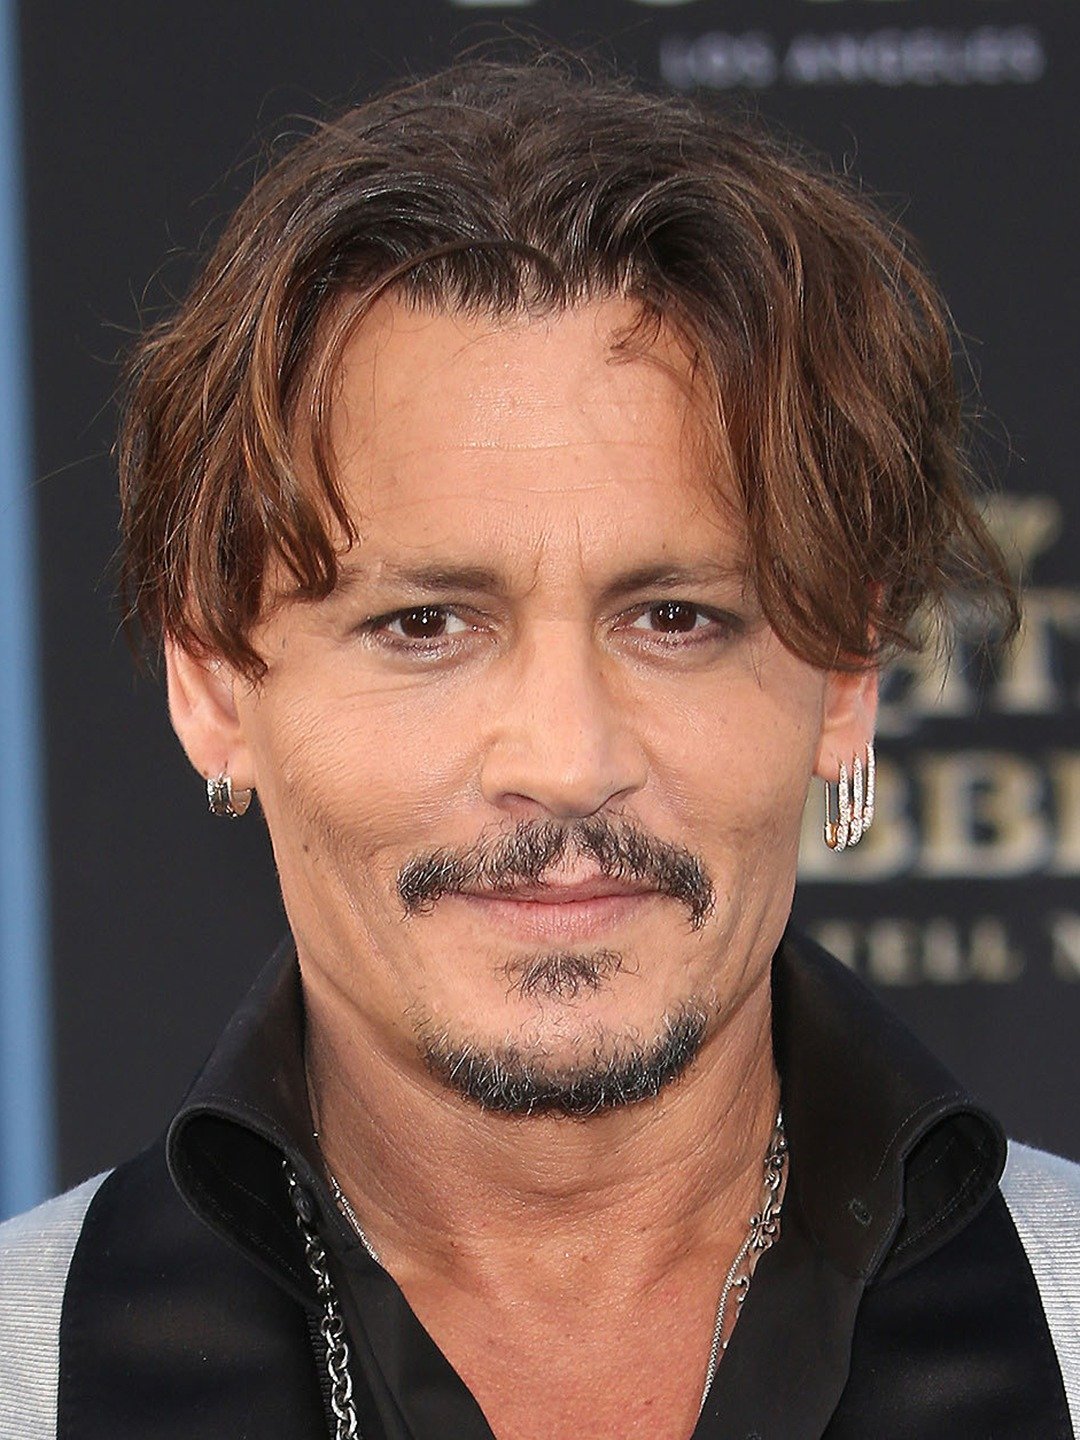 Johnny Depp (born June 9, 1963; age 59) is an American actor, producer, and...